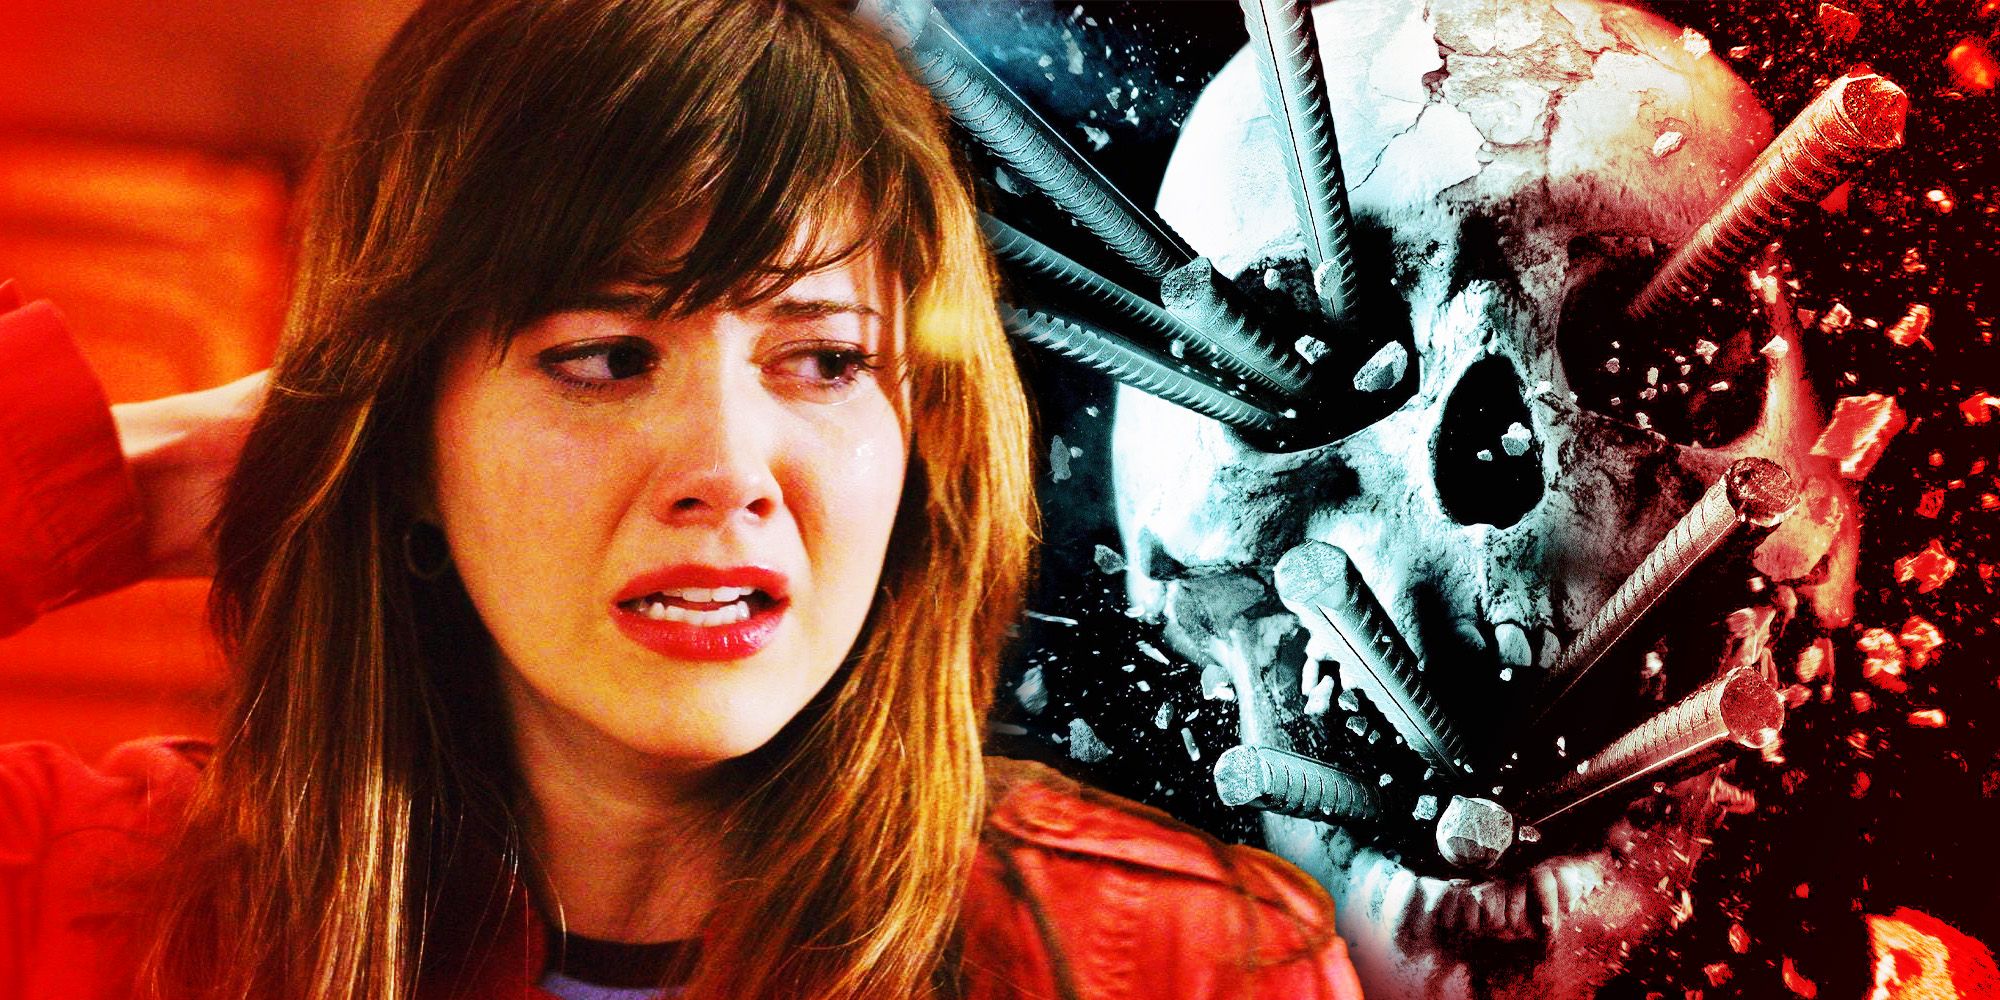 Mary Elizabeth Winstead in Final Destination 3 with Death